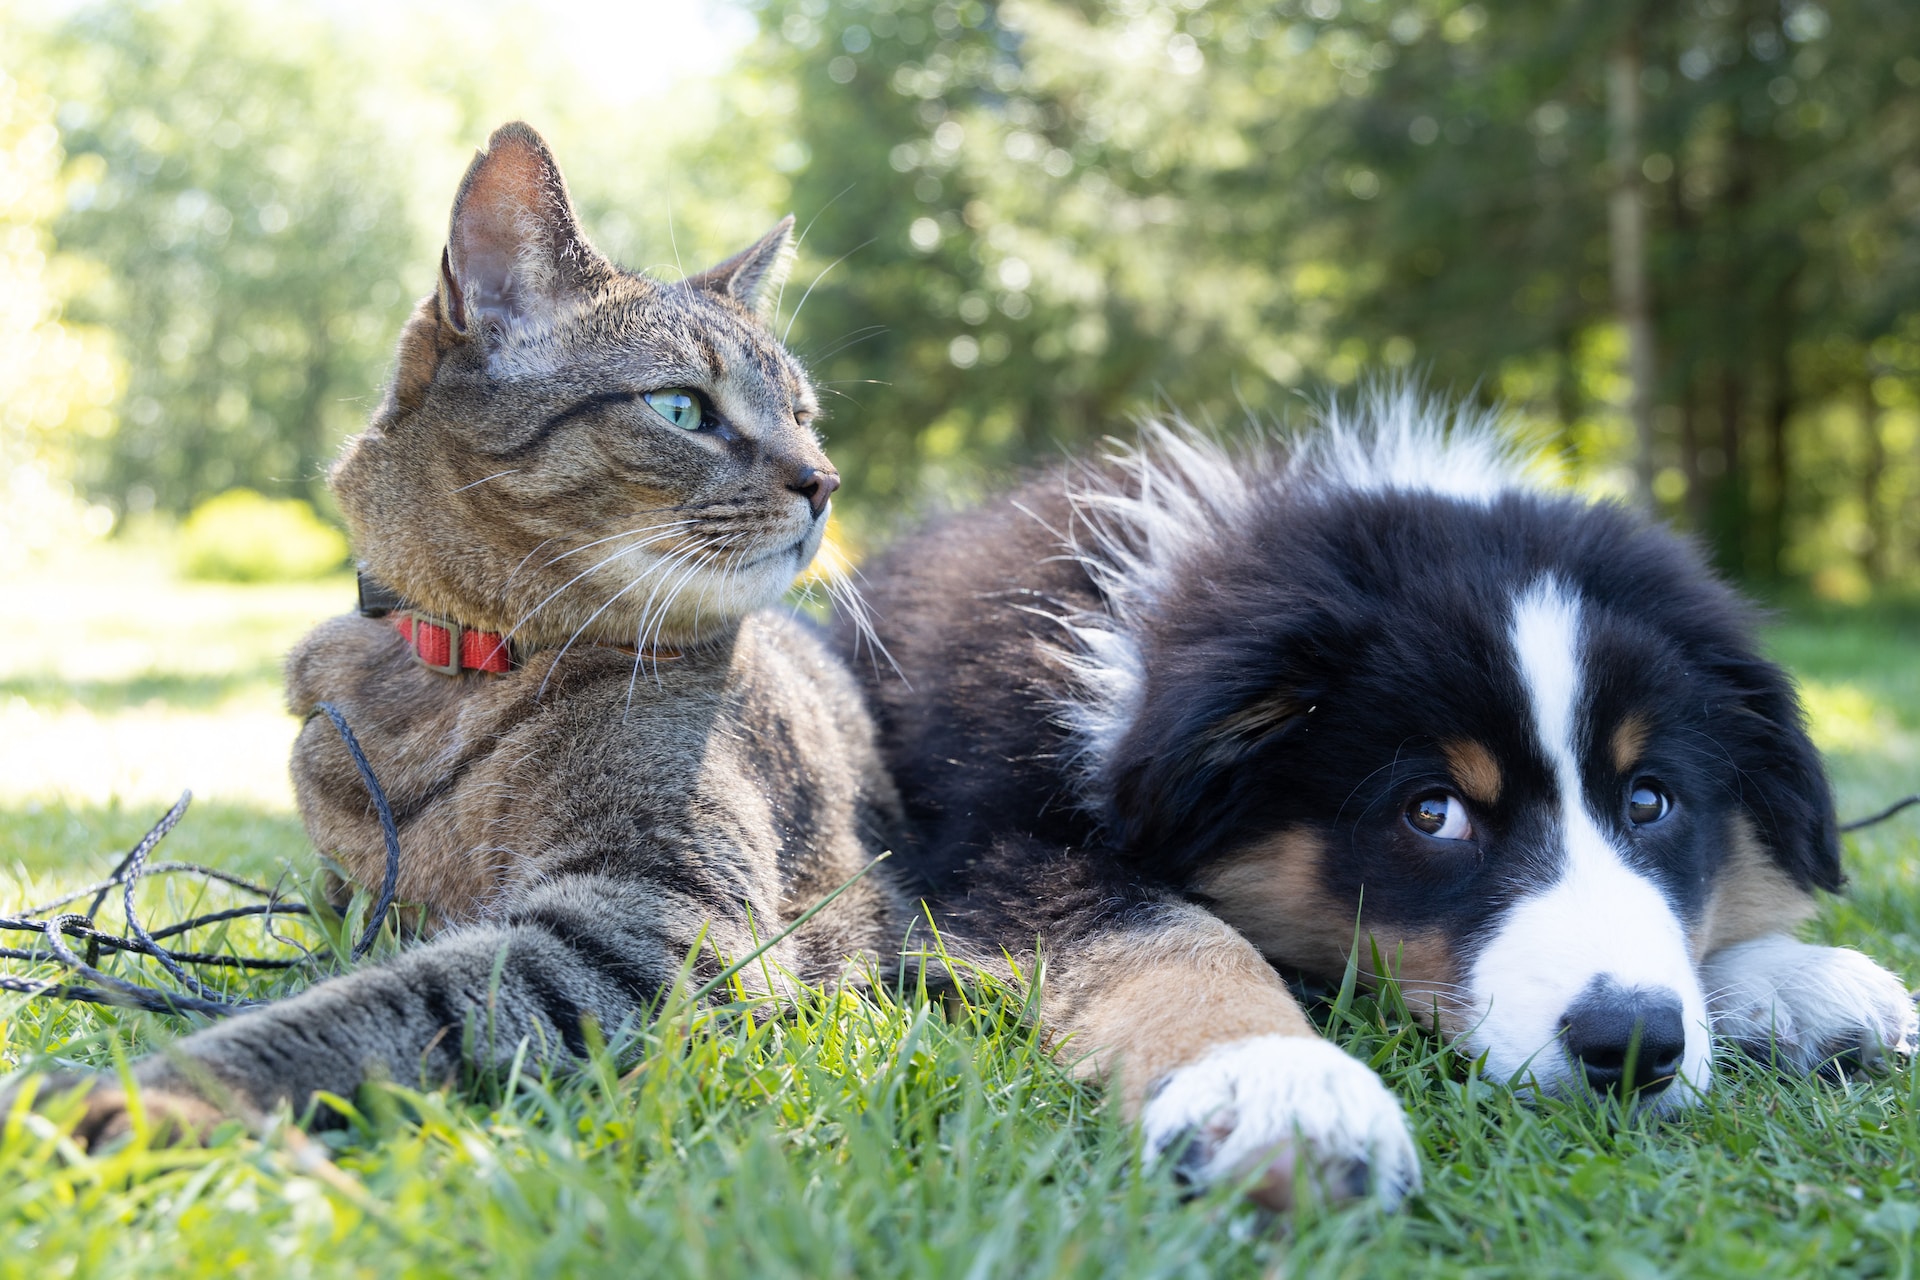 The Top 5 Pets And How To Care For Them